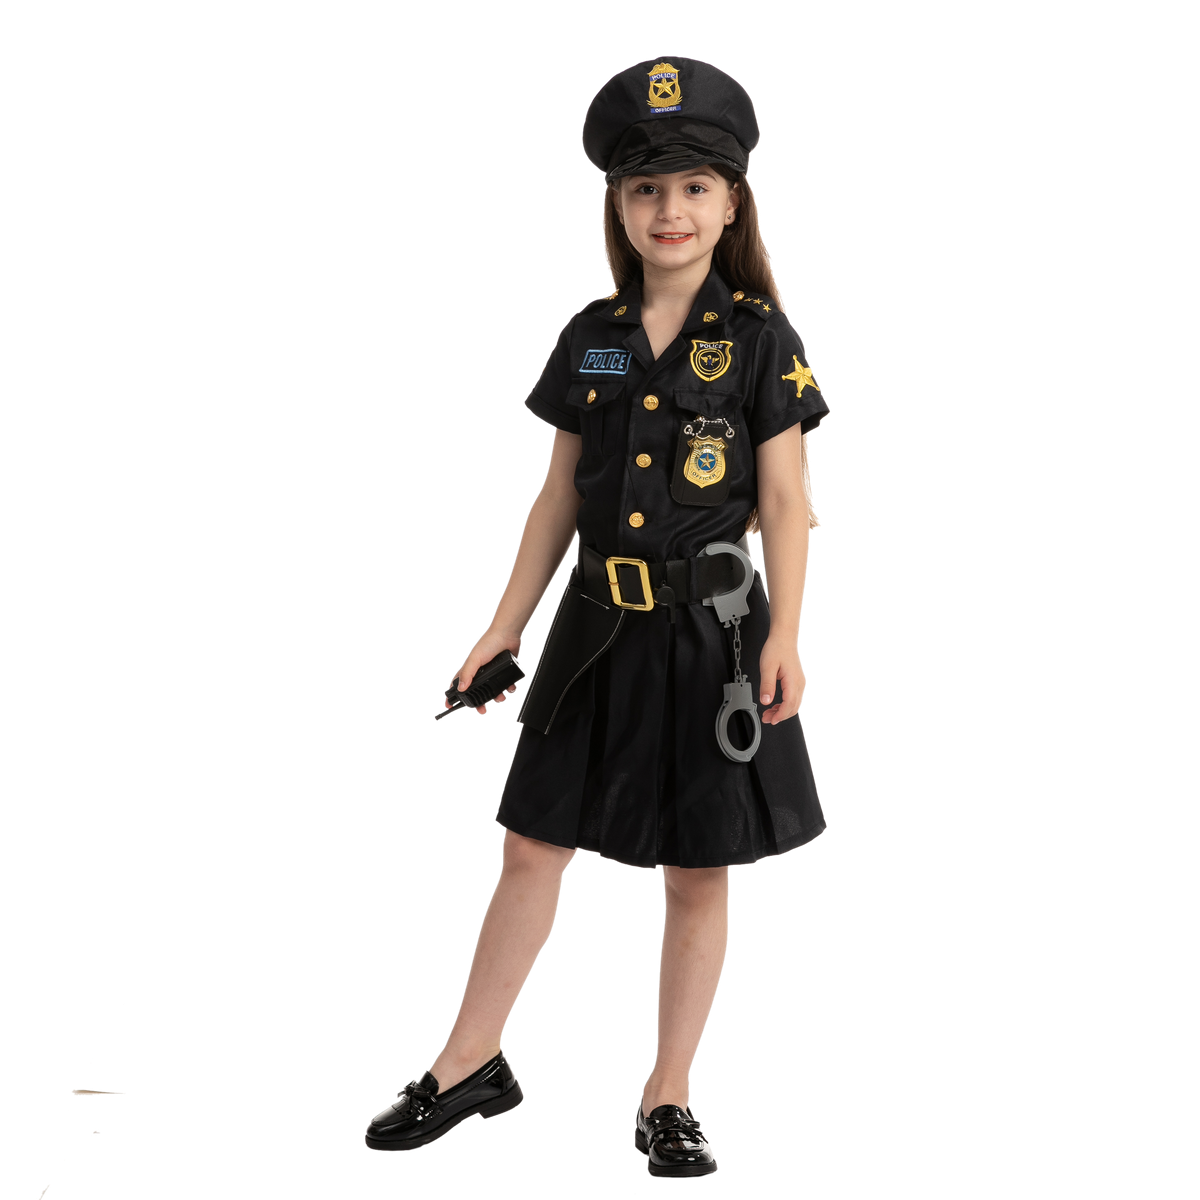 Police Girl Officer Costume - Child | Spooktacular Creations